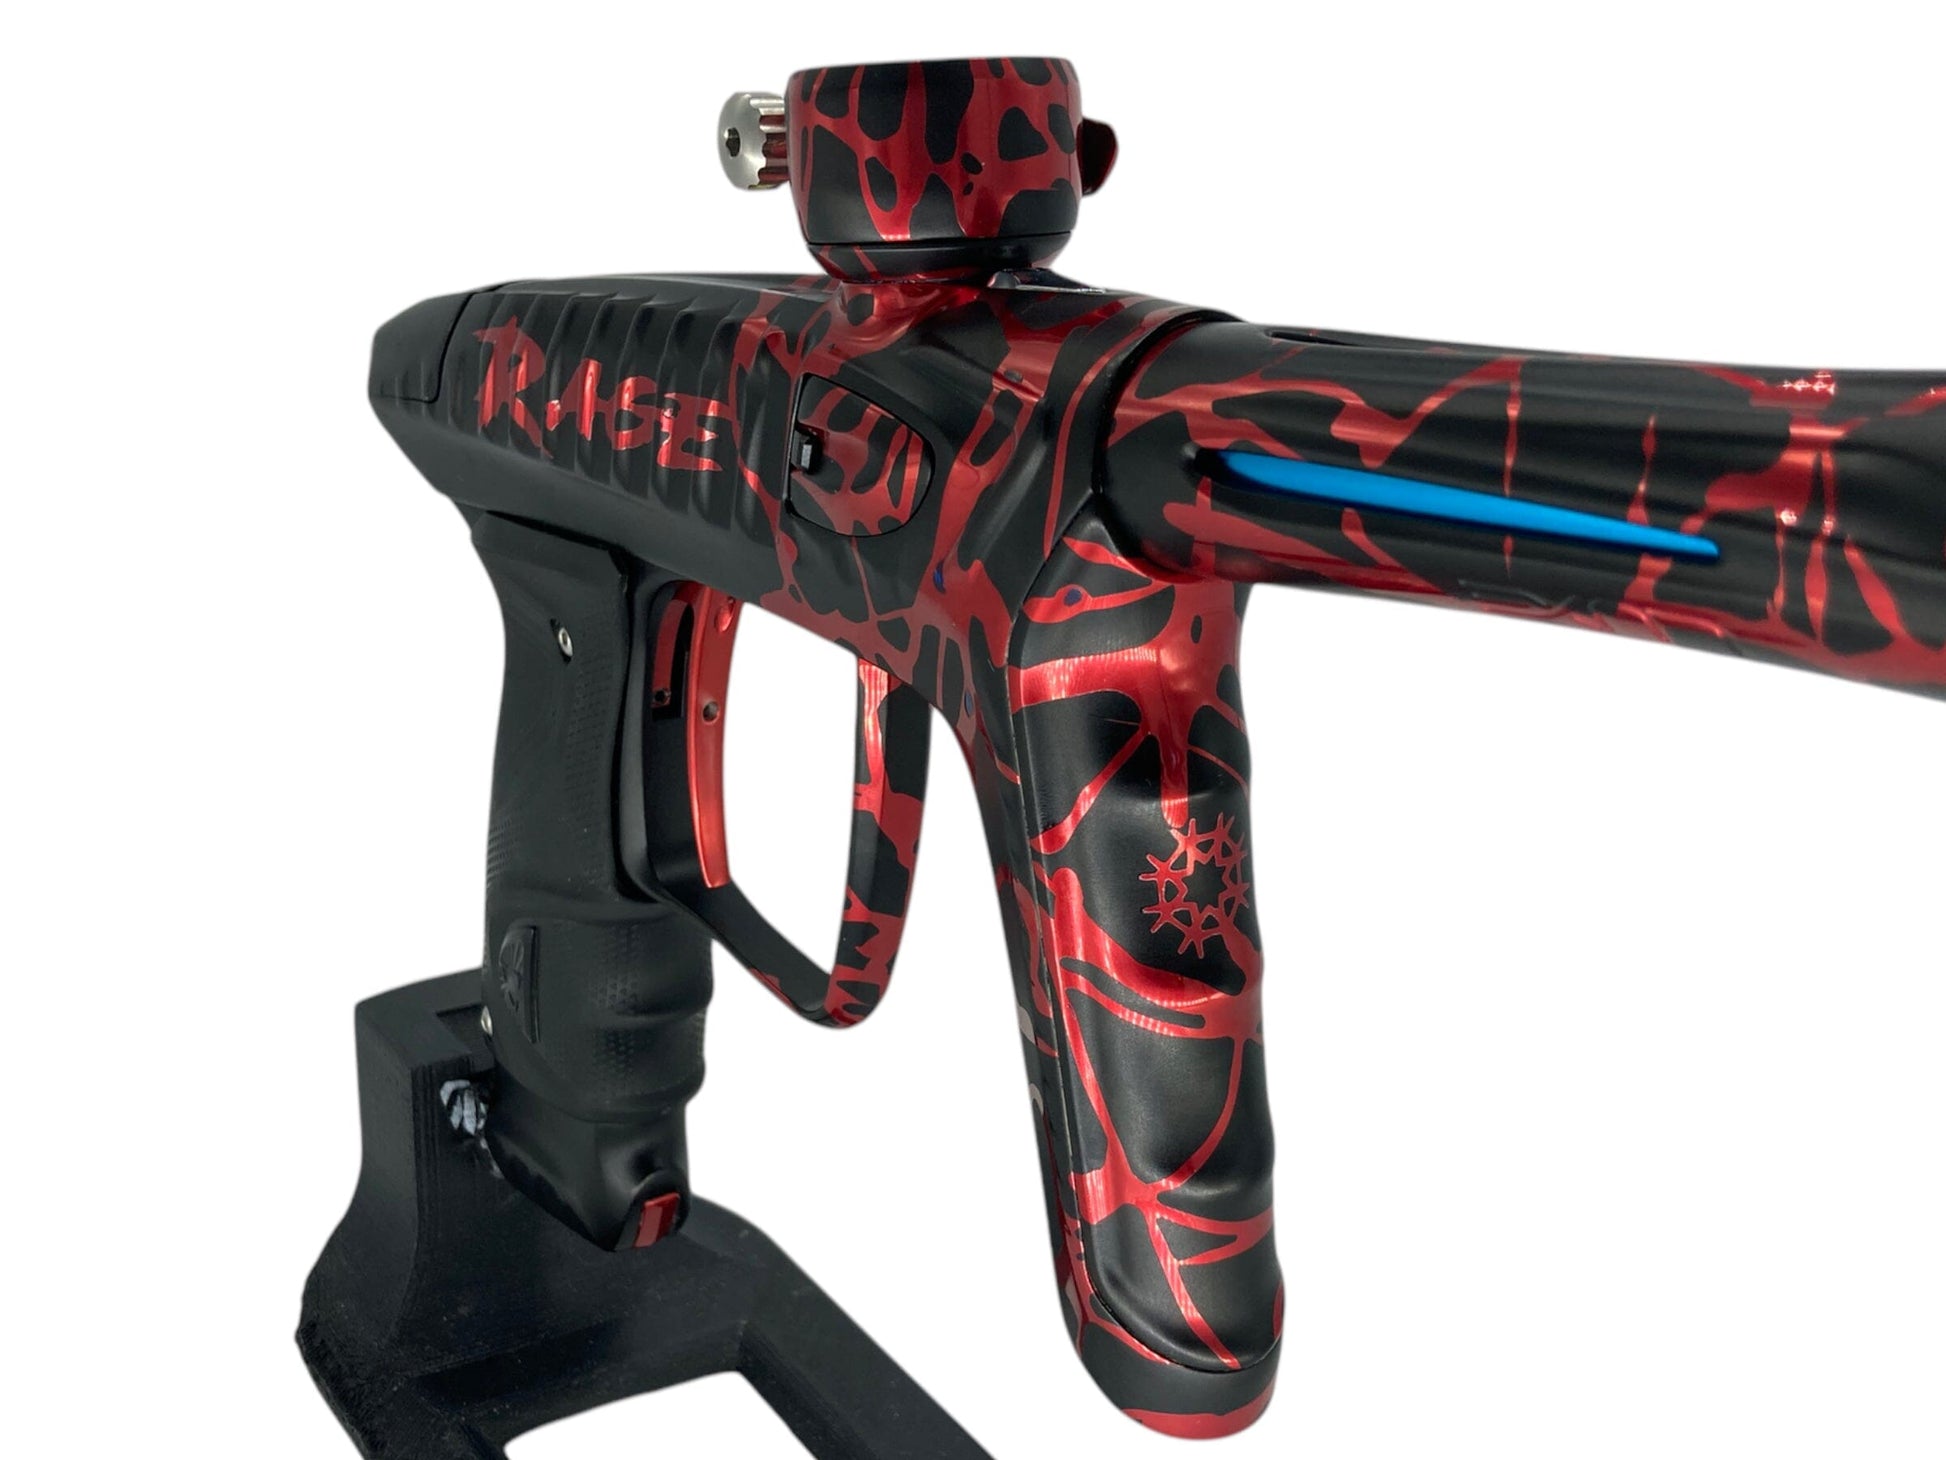 Used Project Luxe TM40 Paintball Gun Paintball Gun from CPXBrosPaintball Buy/Sell/Trade Paintball Markers, New Paintball Guns, Paintball Hoppers, Paintball Masks, and Hormesis Headbands